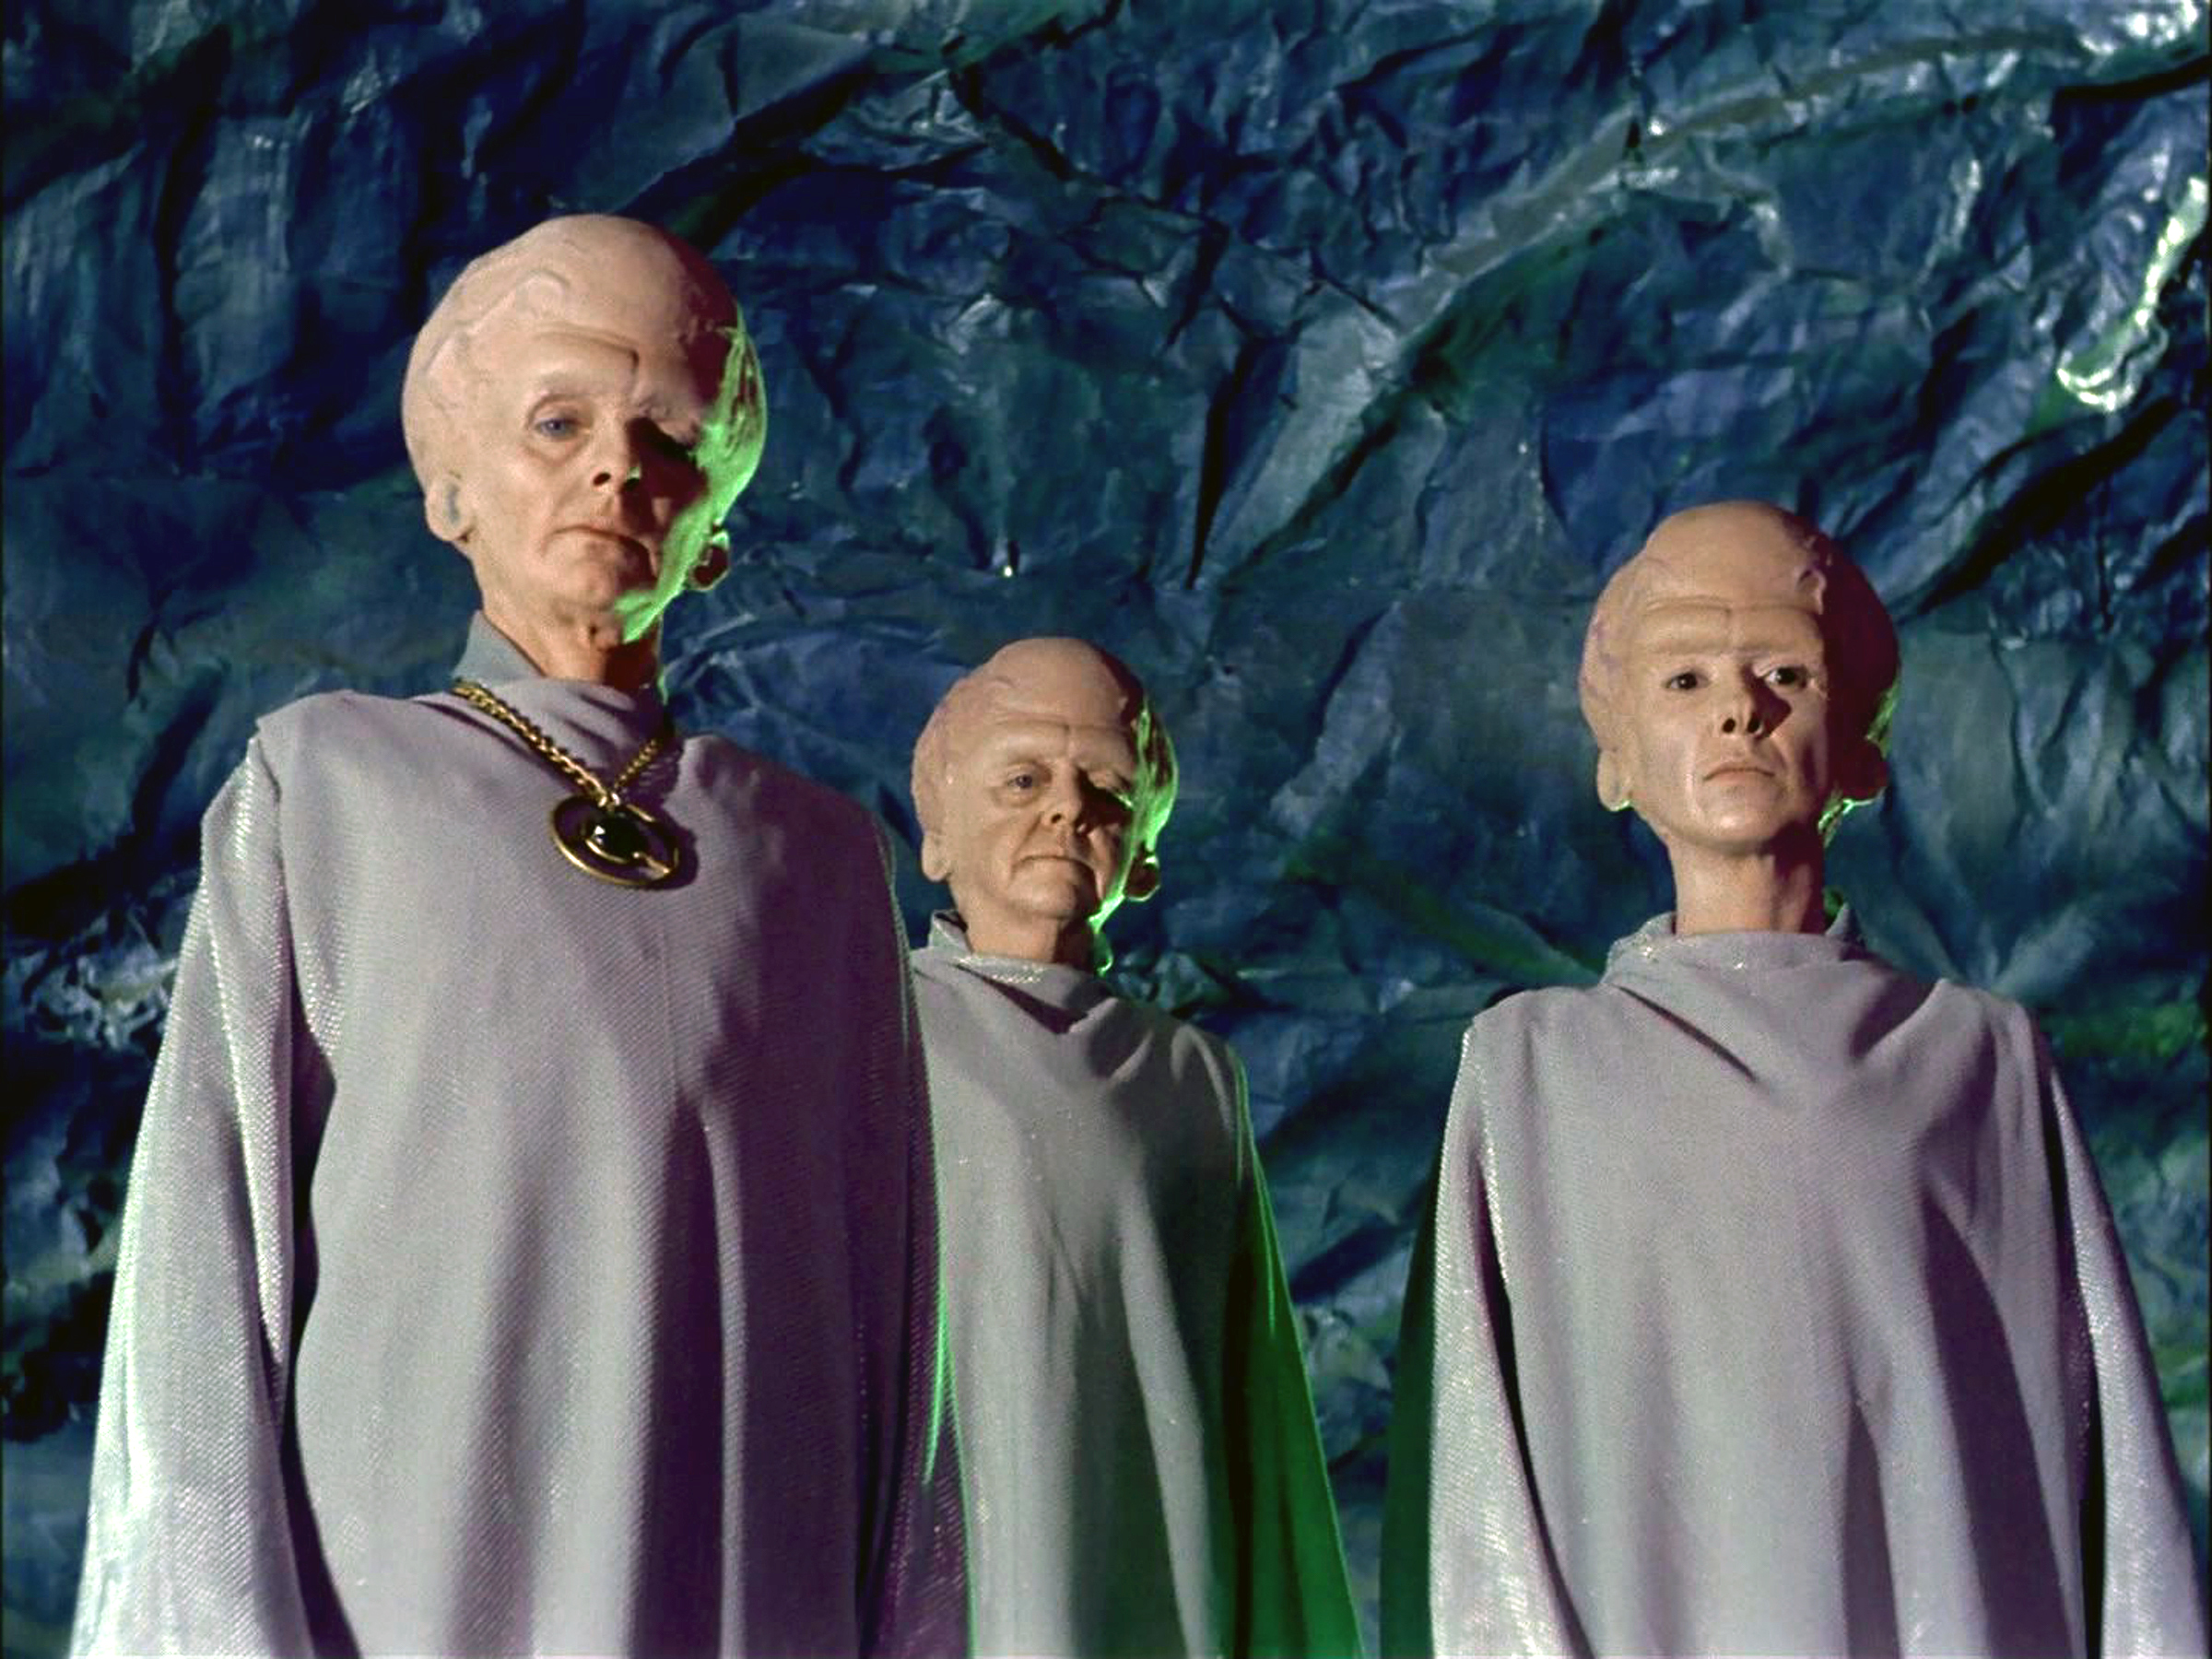 Meg Wyllie as The Keeper, Georgia Schmidt as First Talosian and Serena Sande as Second Talosian in the Star Trek: The Original Series, broadcast until Oct. 4, 1988.